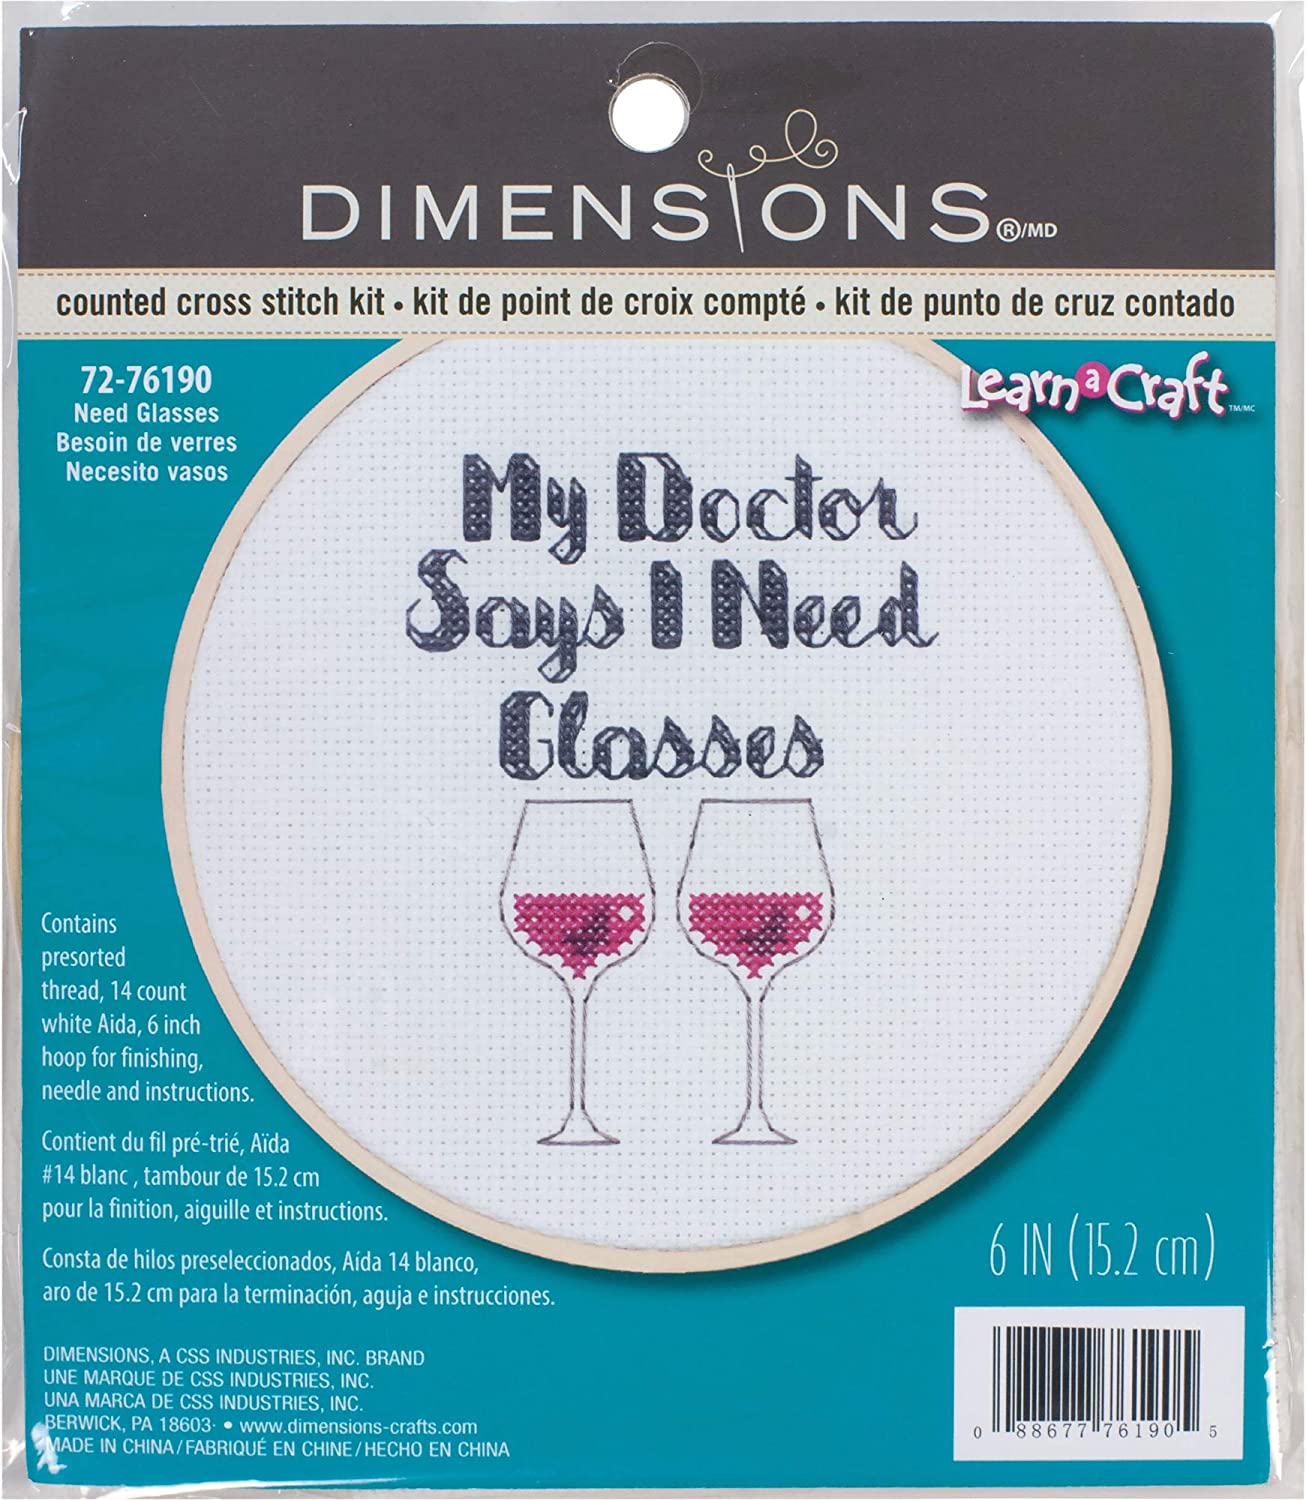 Need Glasses Counted Cross Stitch Kit: Kit Includes: Presorted Thread, 14  Count White Aida, 6 Inch Wood Hoop, Needle & Instructions